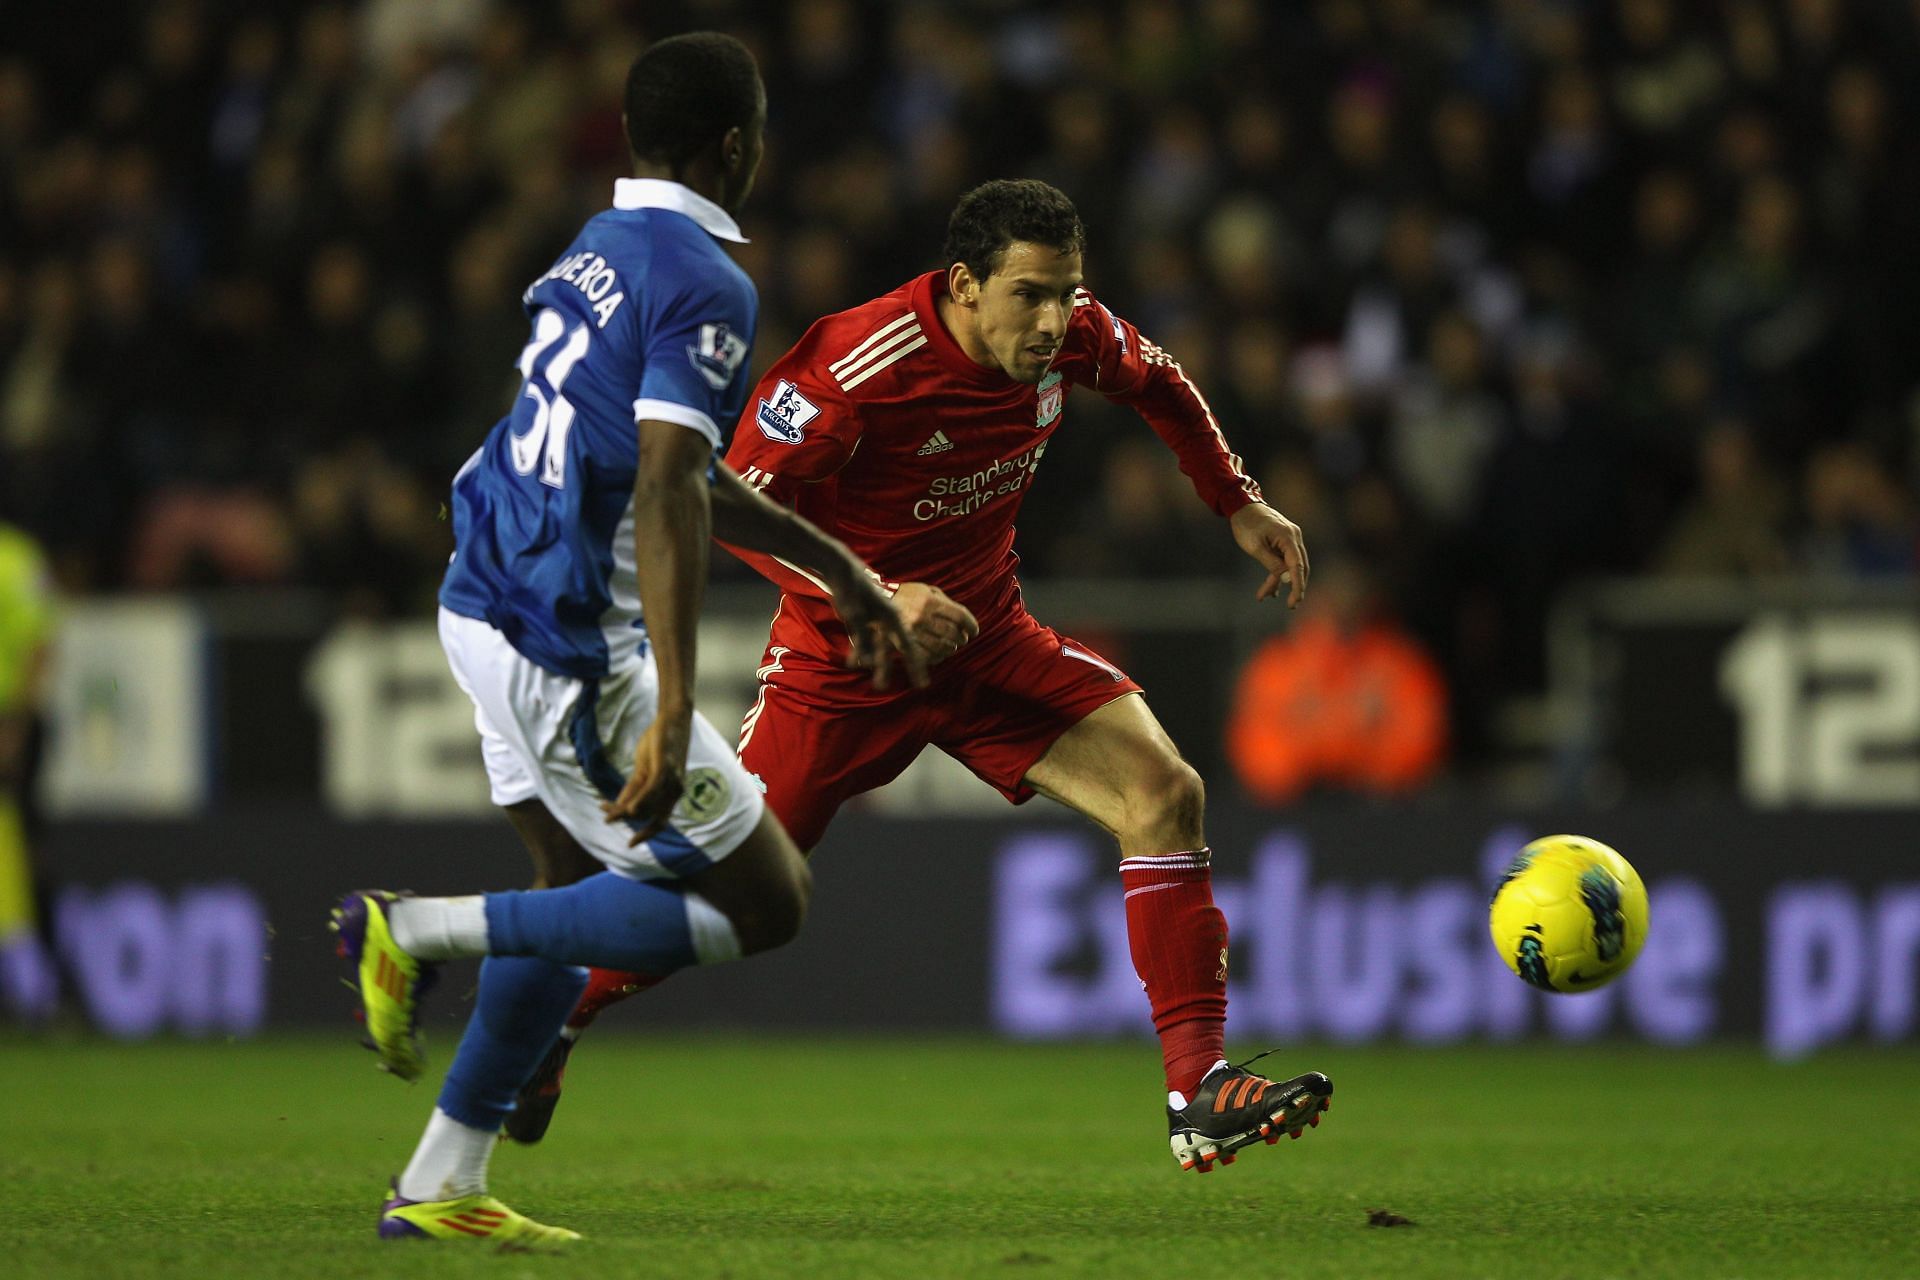 Maxi Rodriguez scored two hat-tricks for the Reds